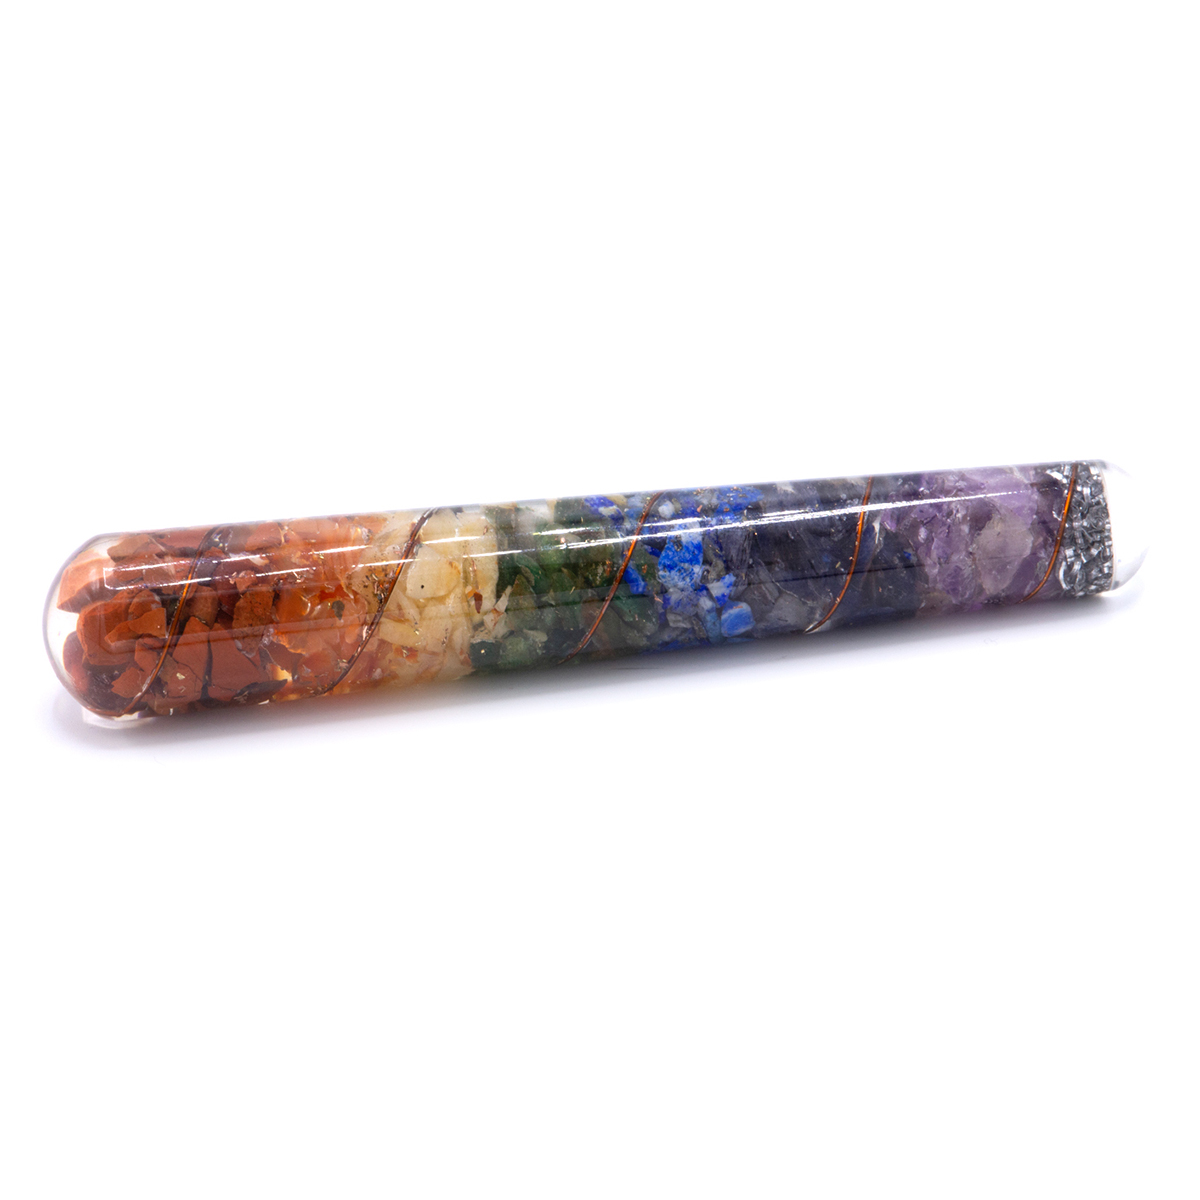 Orgonite Chackra and Copper Healing Wand – 140 x 30 mm